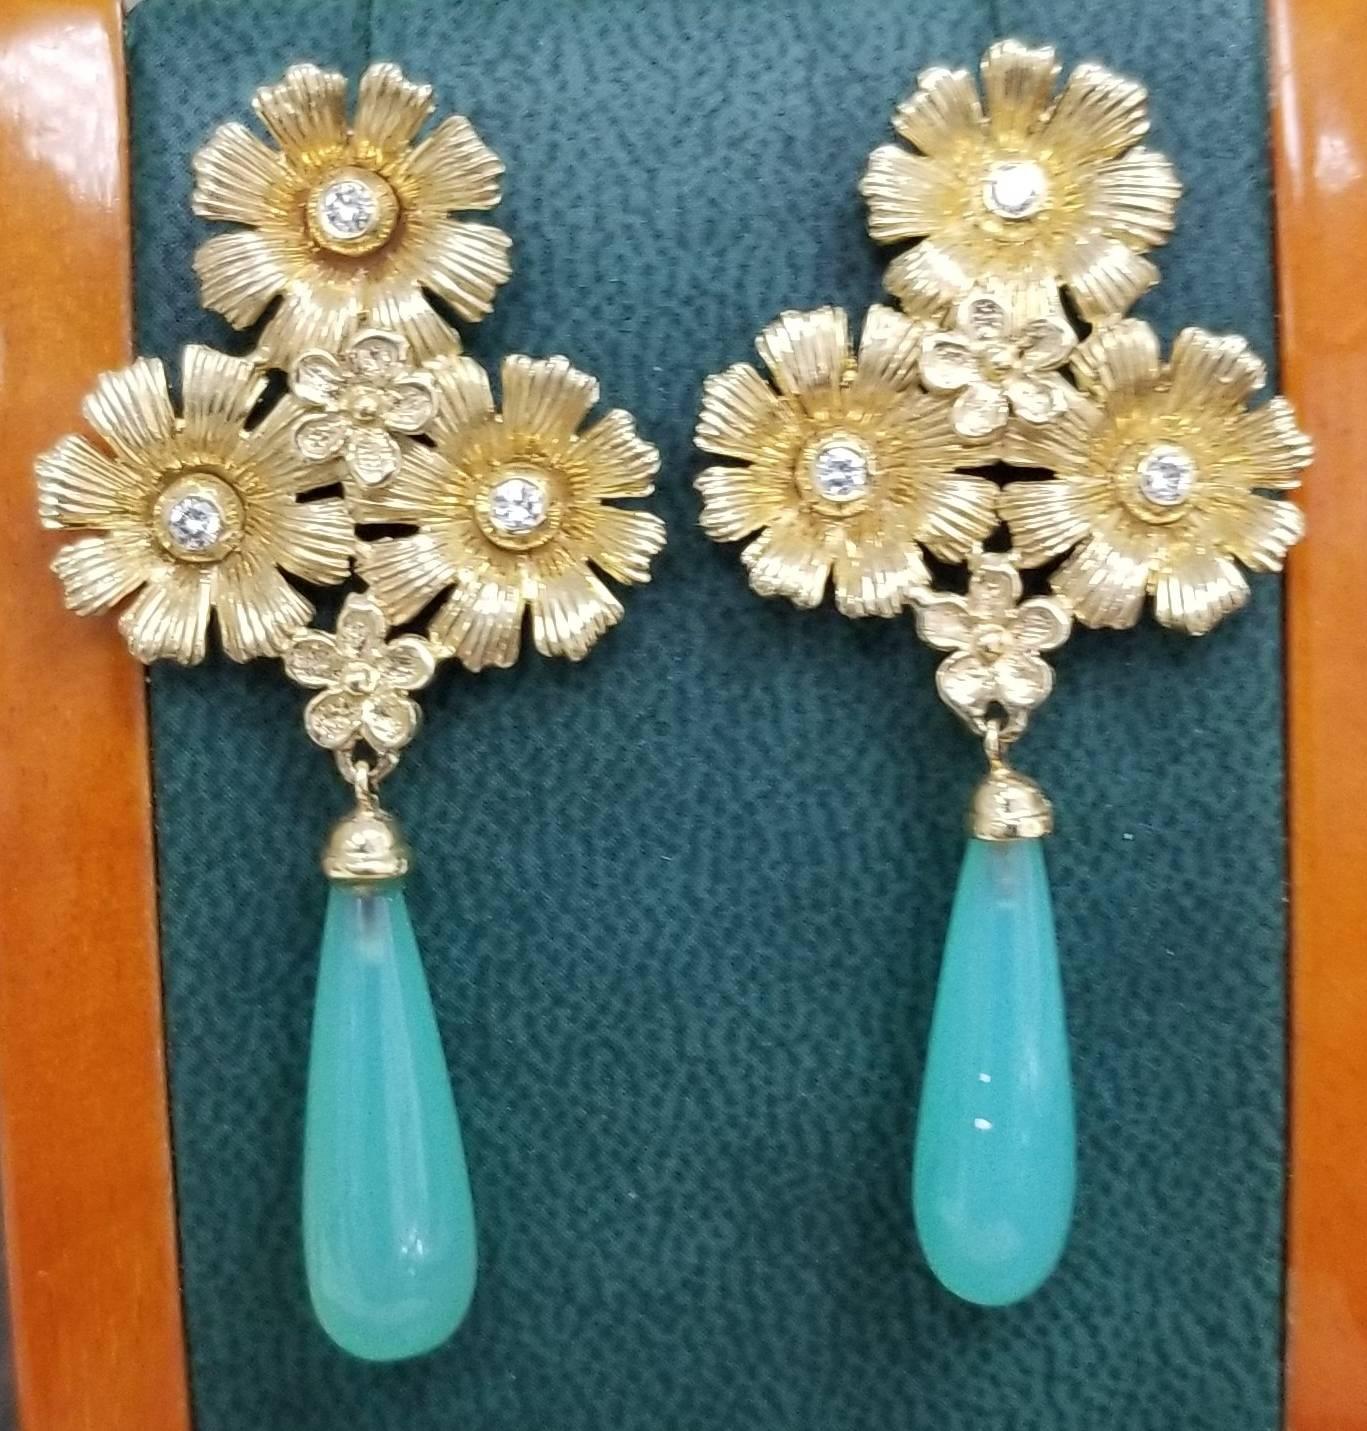 14k yellow gold flower earrings with  4 round full cut diamonds weighing .18pts. and 2 Chalcedony drops weighing 15.30cts. 
this design is ours and can be created in any other form; ring, necklace, bracelet, or earrings